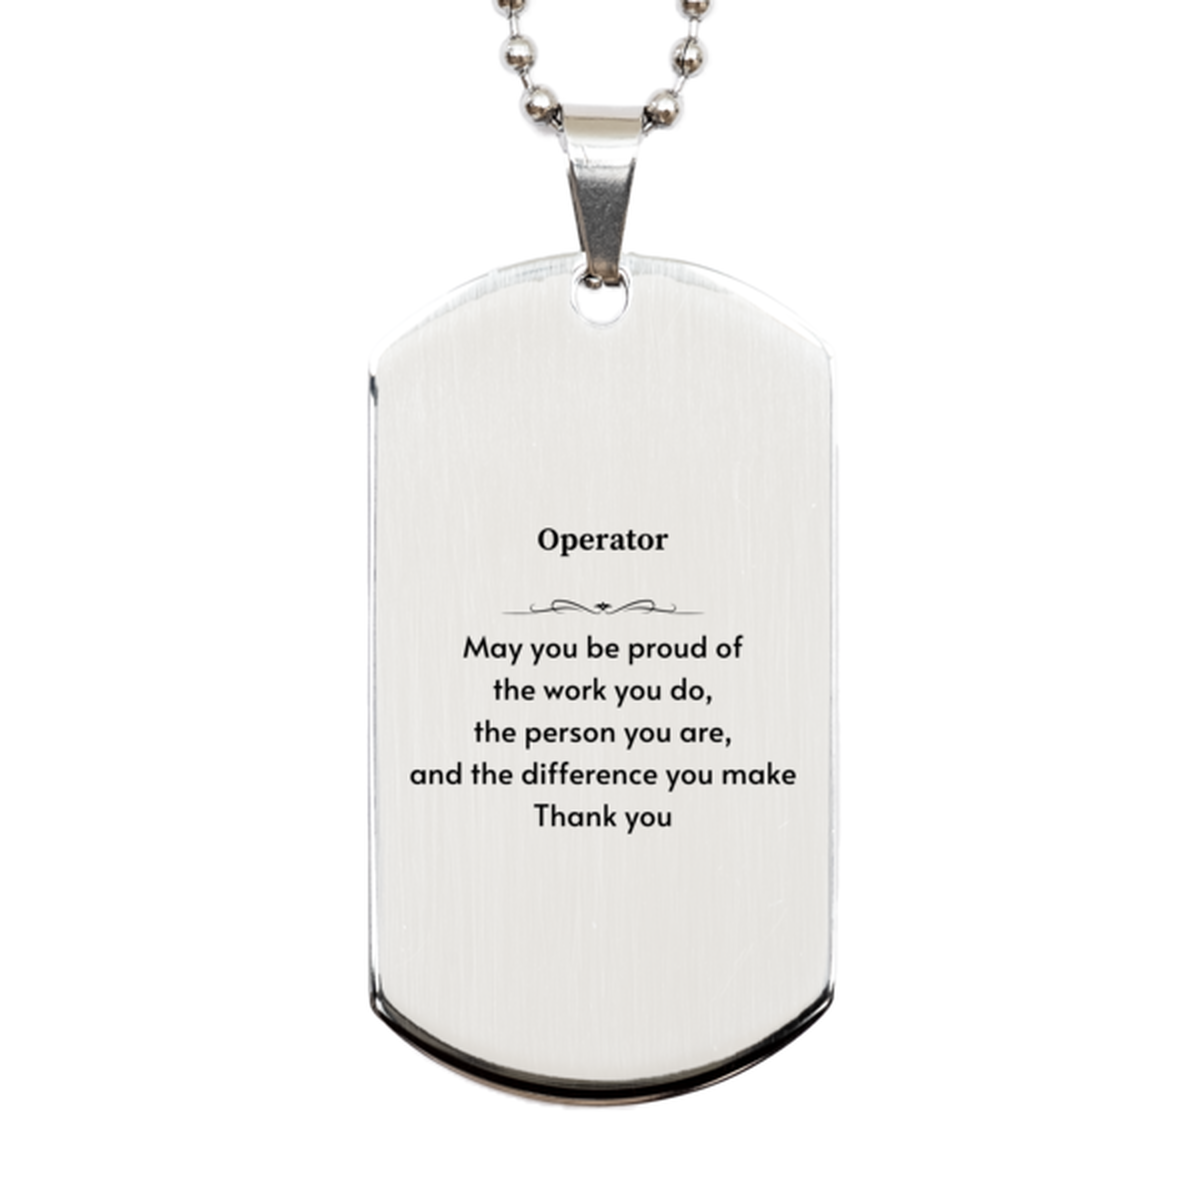 Heartwarming Silver Dog Tag Retirement Coworkers Gifts for Operator, Operator May You be proud of the work you do, the person you are Gifts for Boss Men Women Friends